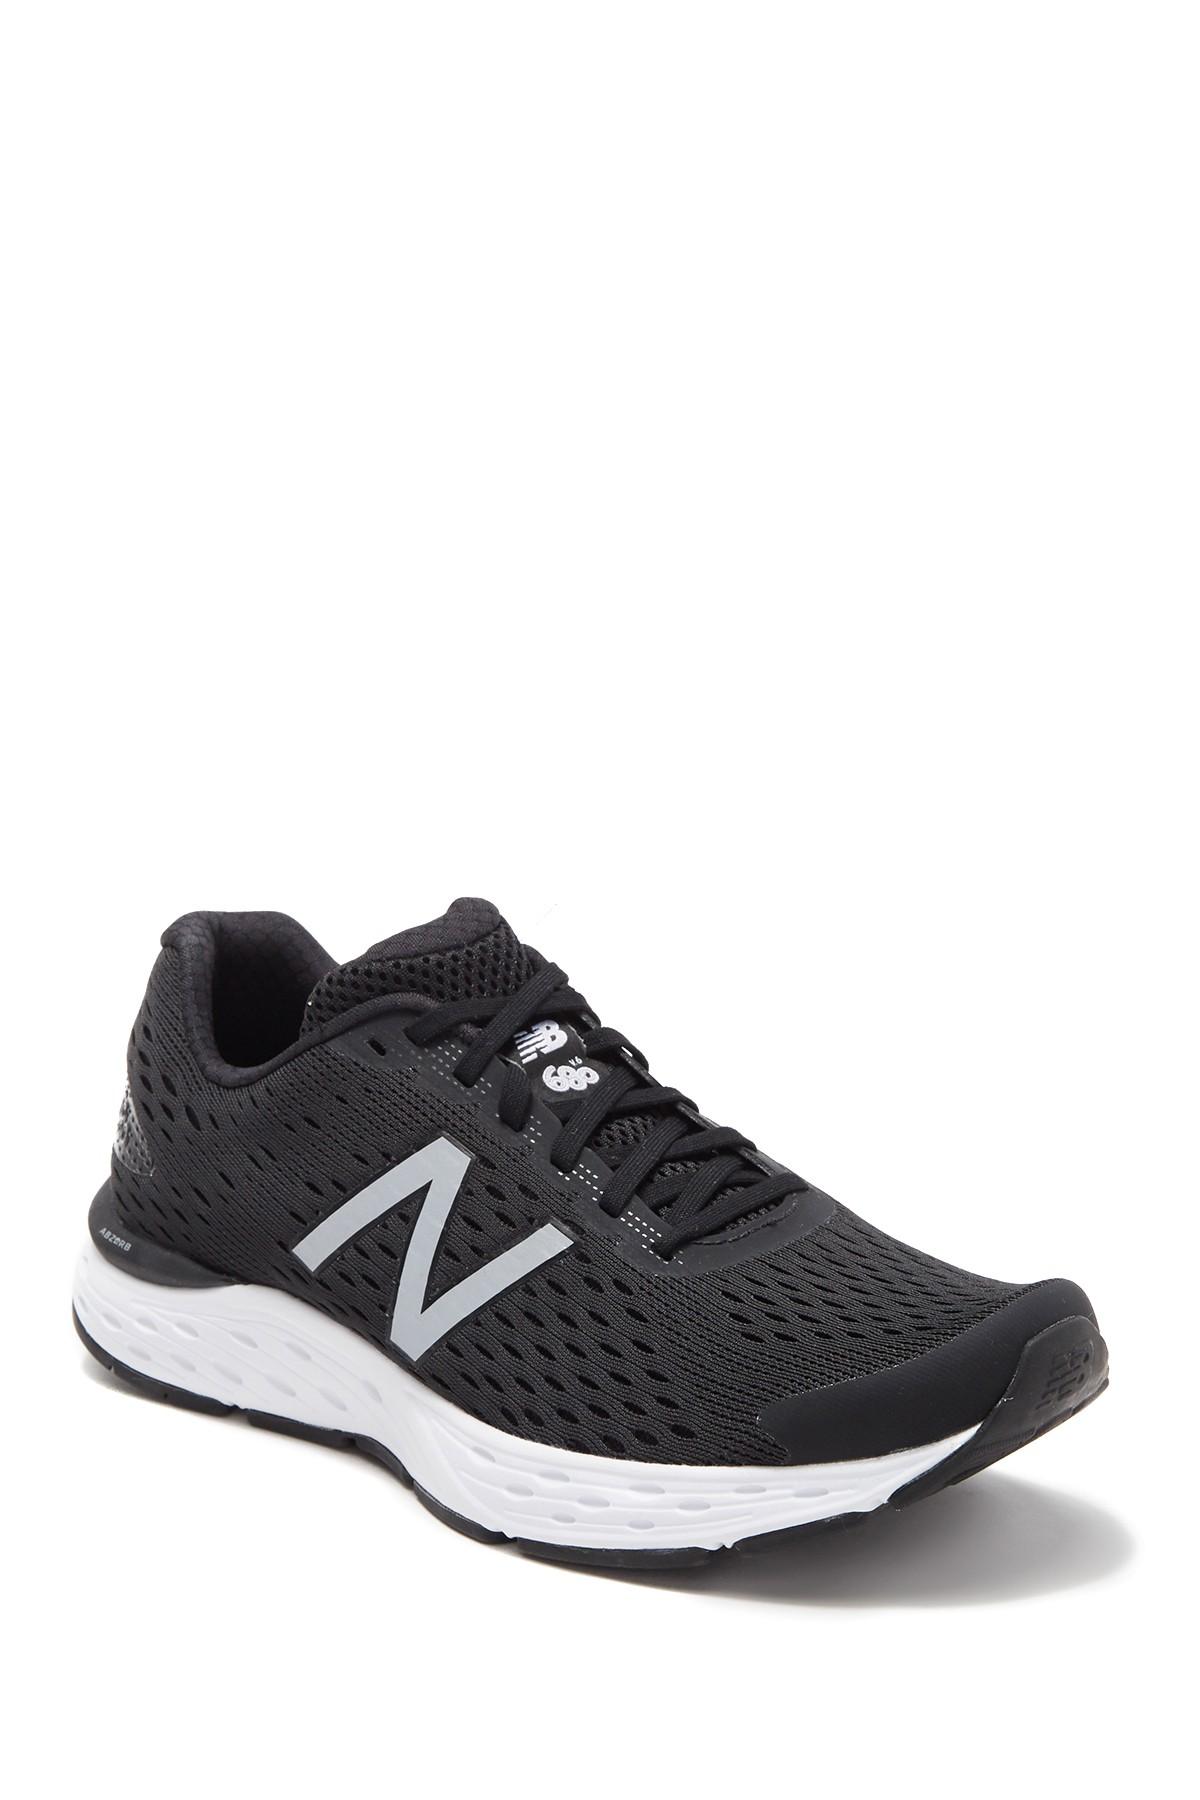 New Balance Synthetic 680v6 Running Sneakers From Finish Line in Black ...